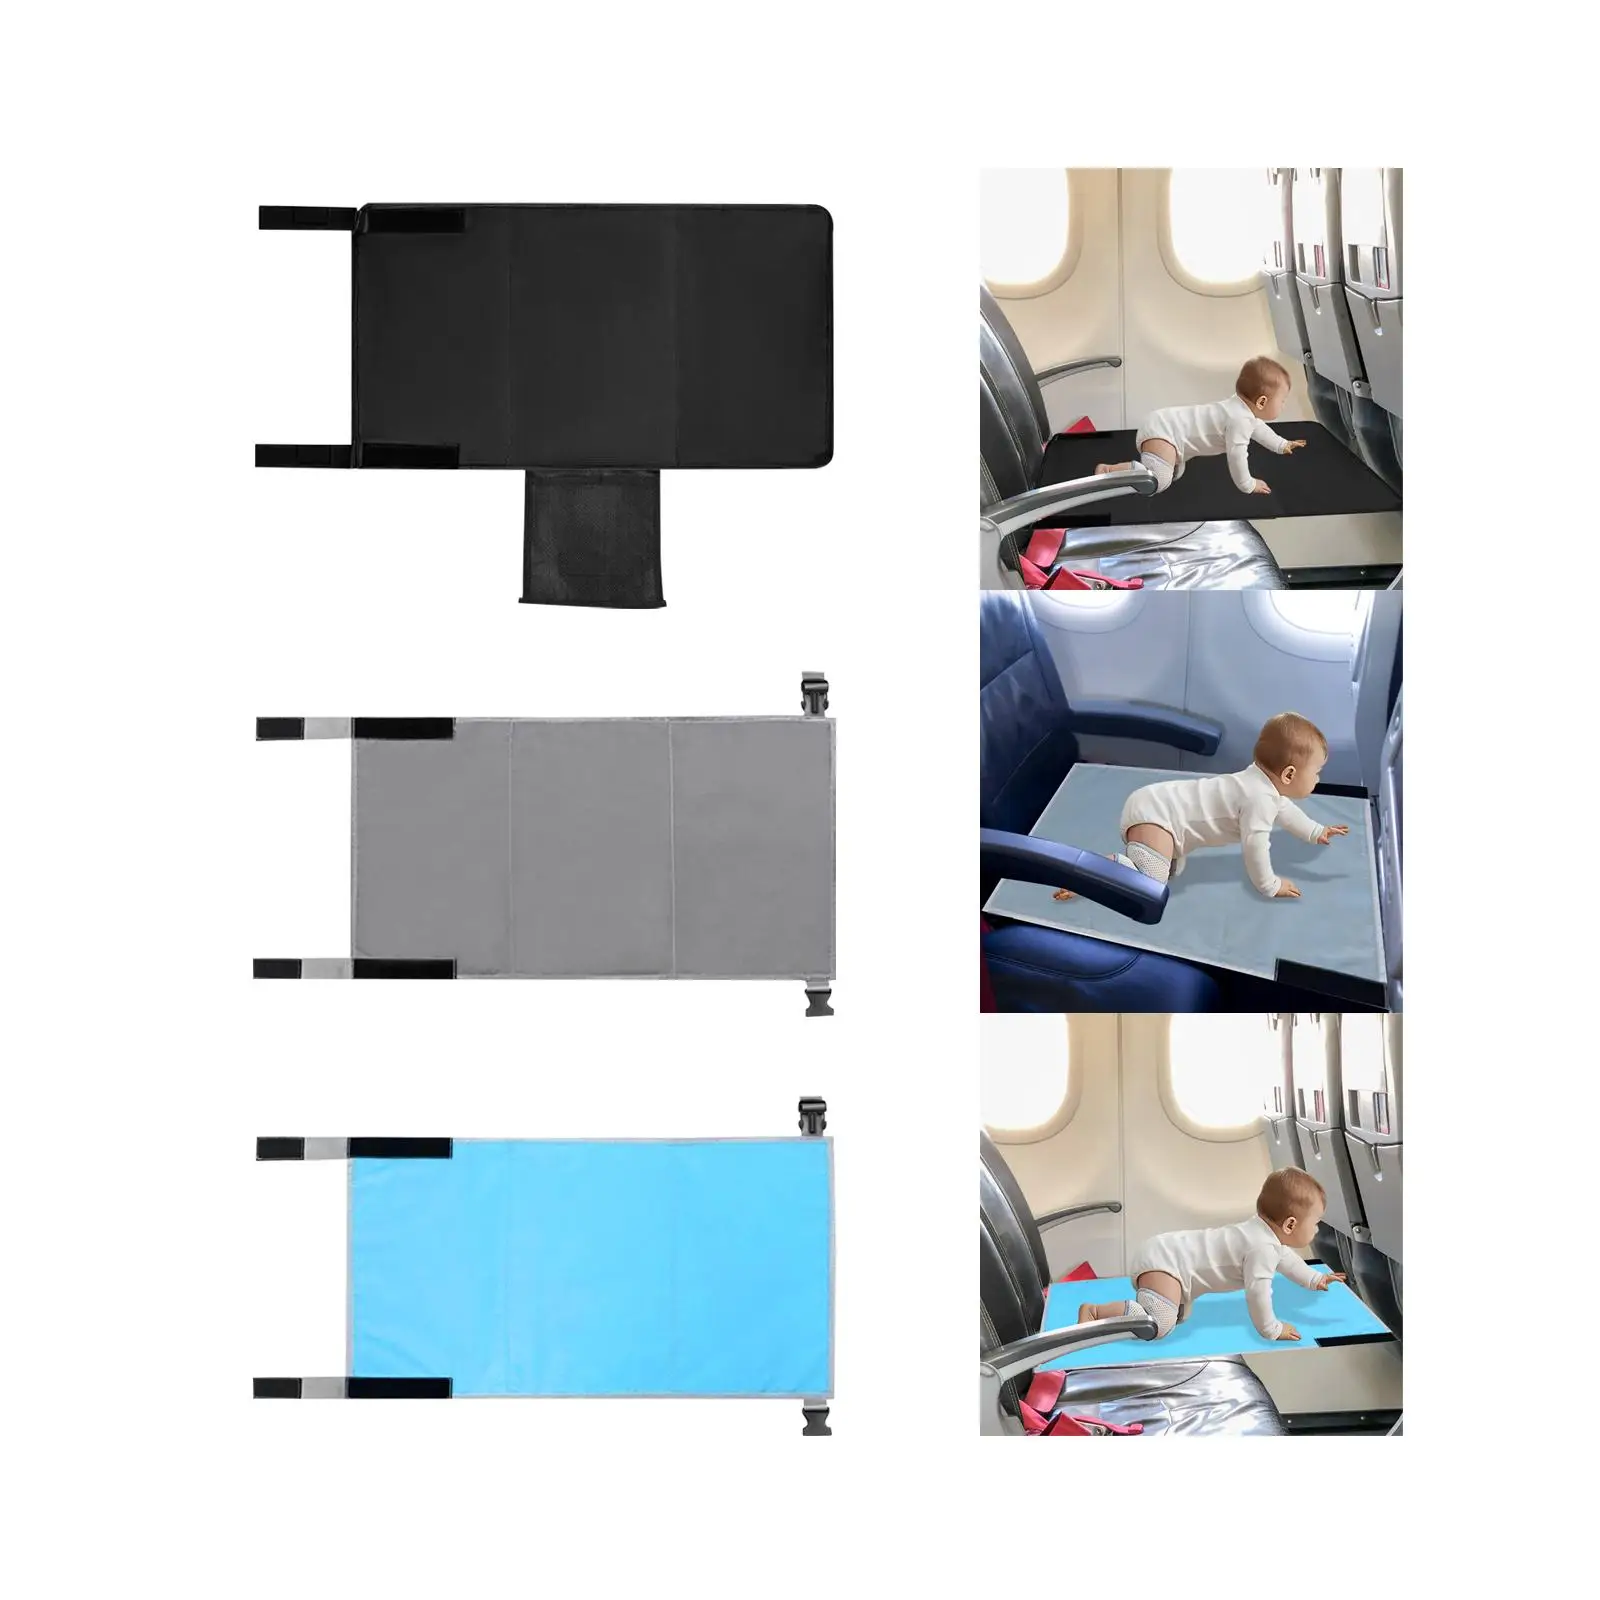 Foot Rest Hammock Heavy Duty High Strength Portable Kids Bed Airplane Seat Extender for Flights Airplane Travel Accessories